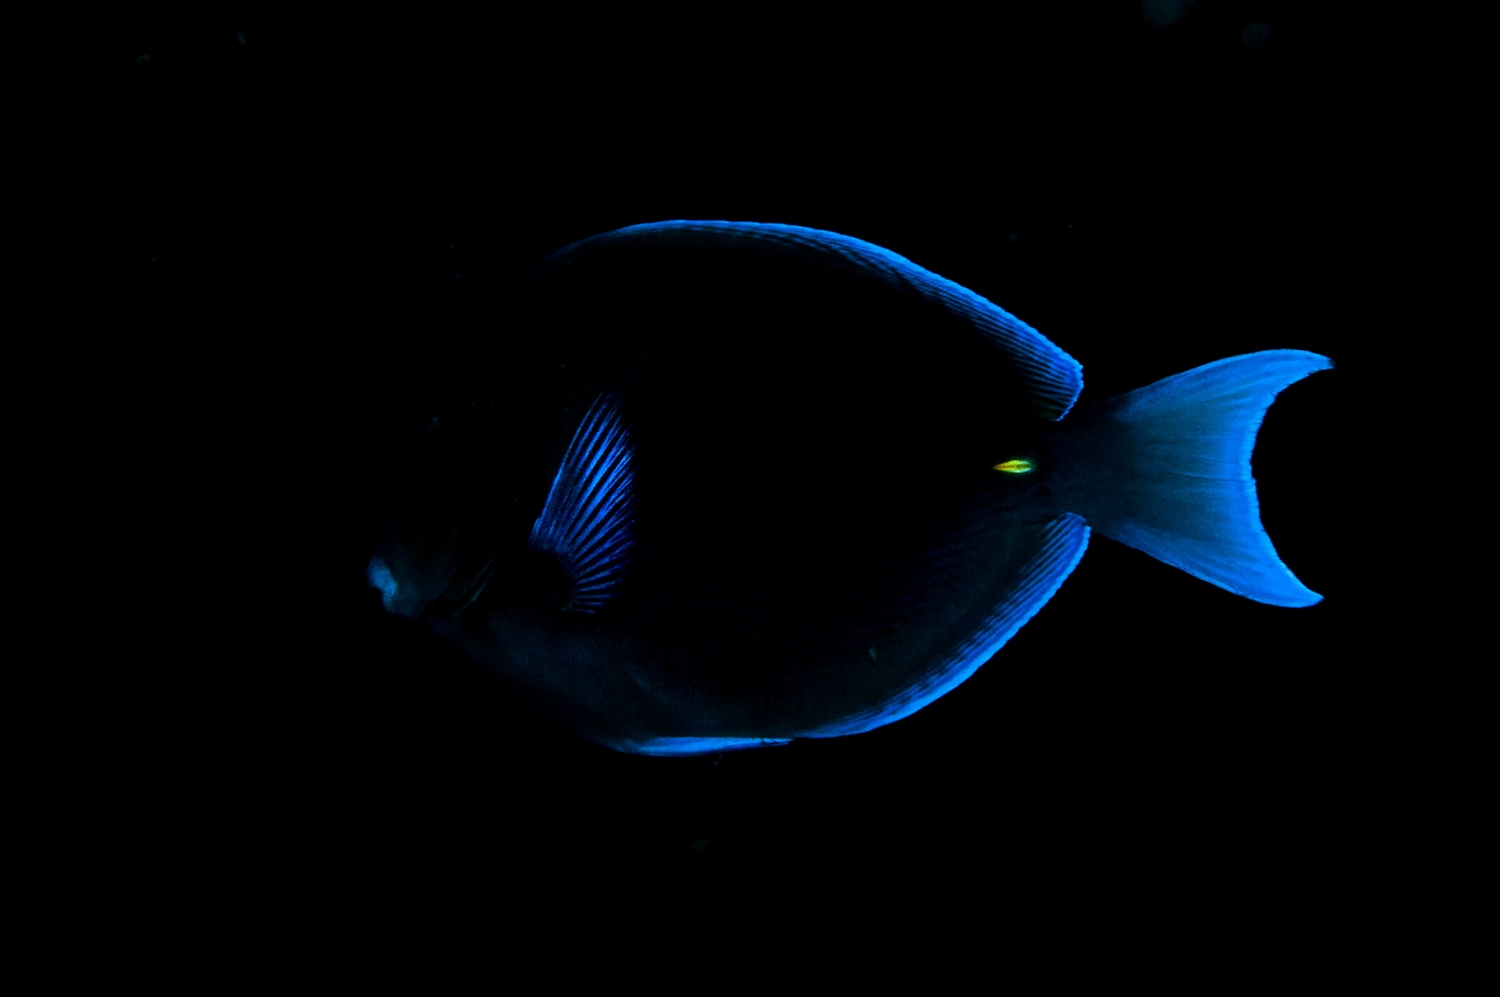  The lips, fins, and tail of a Blue tang   (  Acanthurus coeruleus) in Bonaire on Tuesday, August 11, 2015 